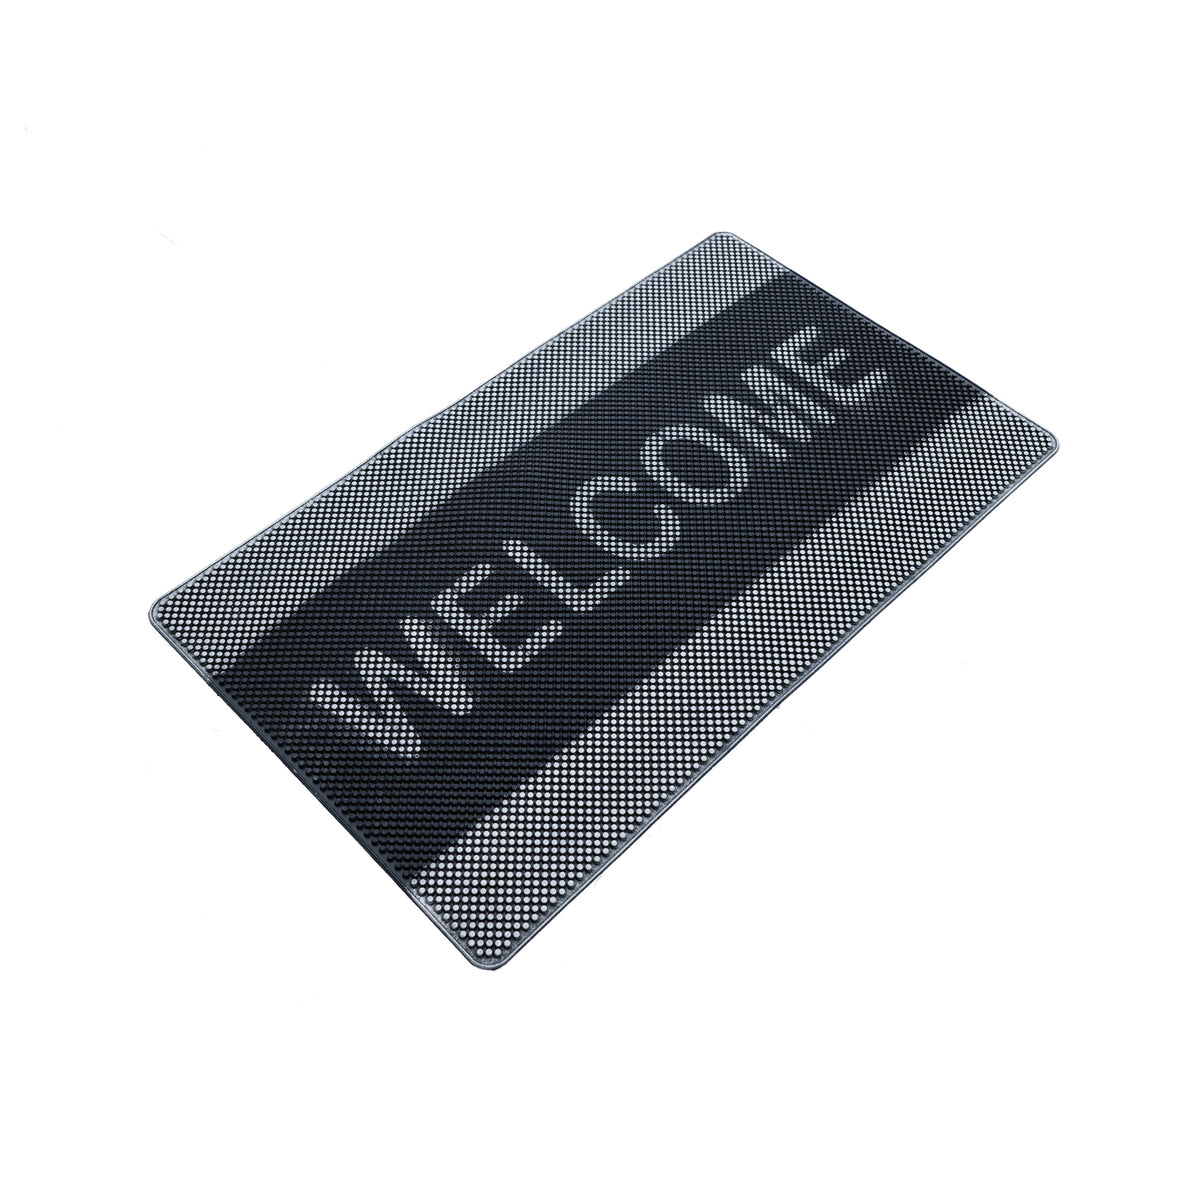 Onlymat Rubber Welcome Anti-Slip Doormat Washable Home Office Entrance 45x75cmx8mm - OnlyMat